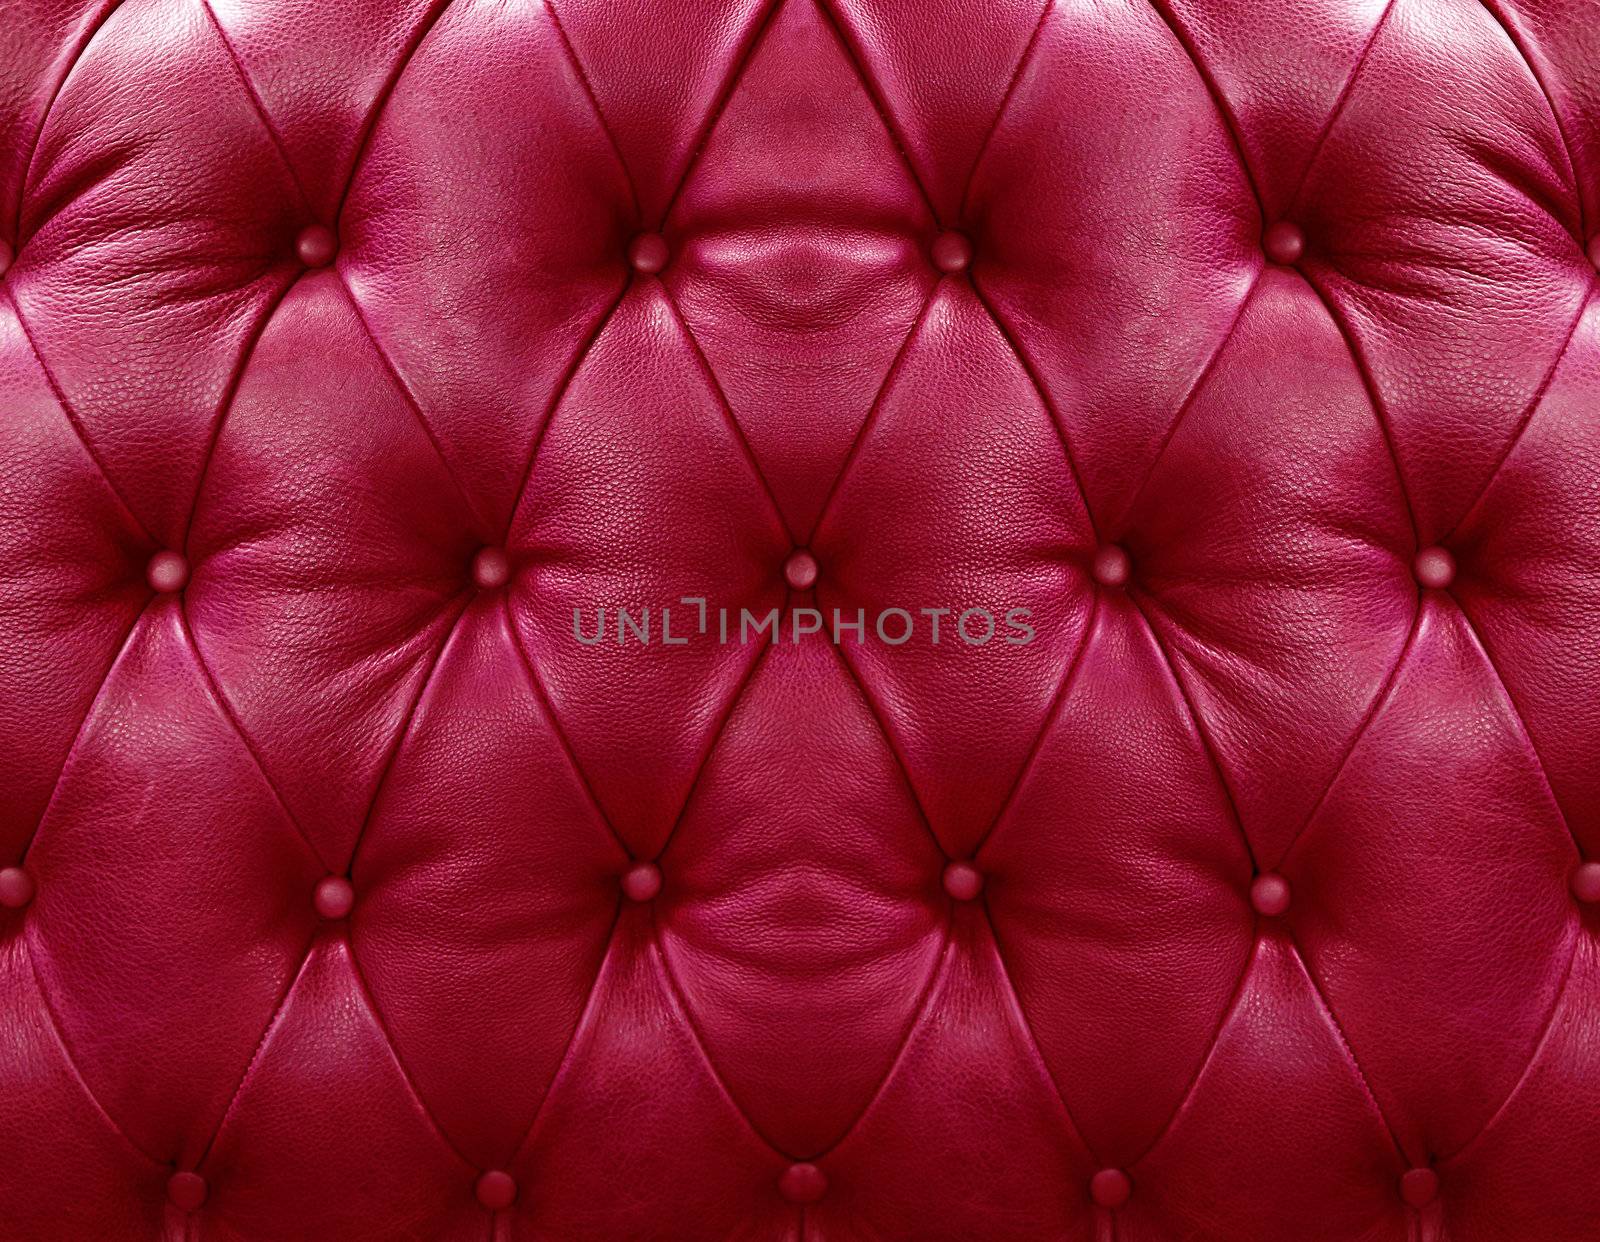 Red upholstery leather by stoonn